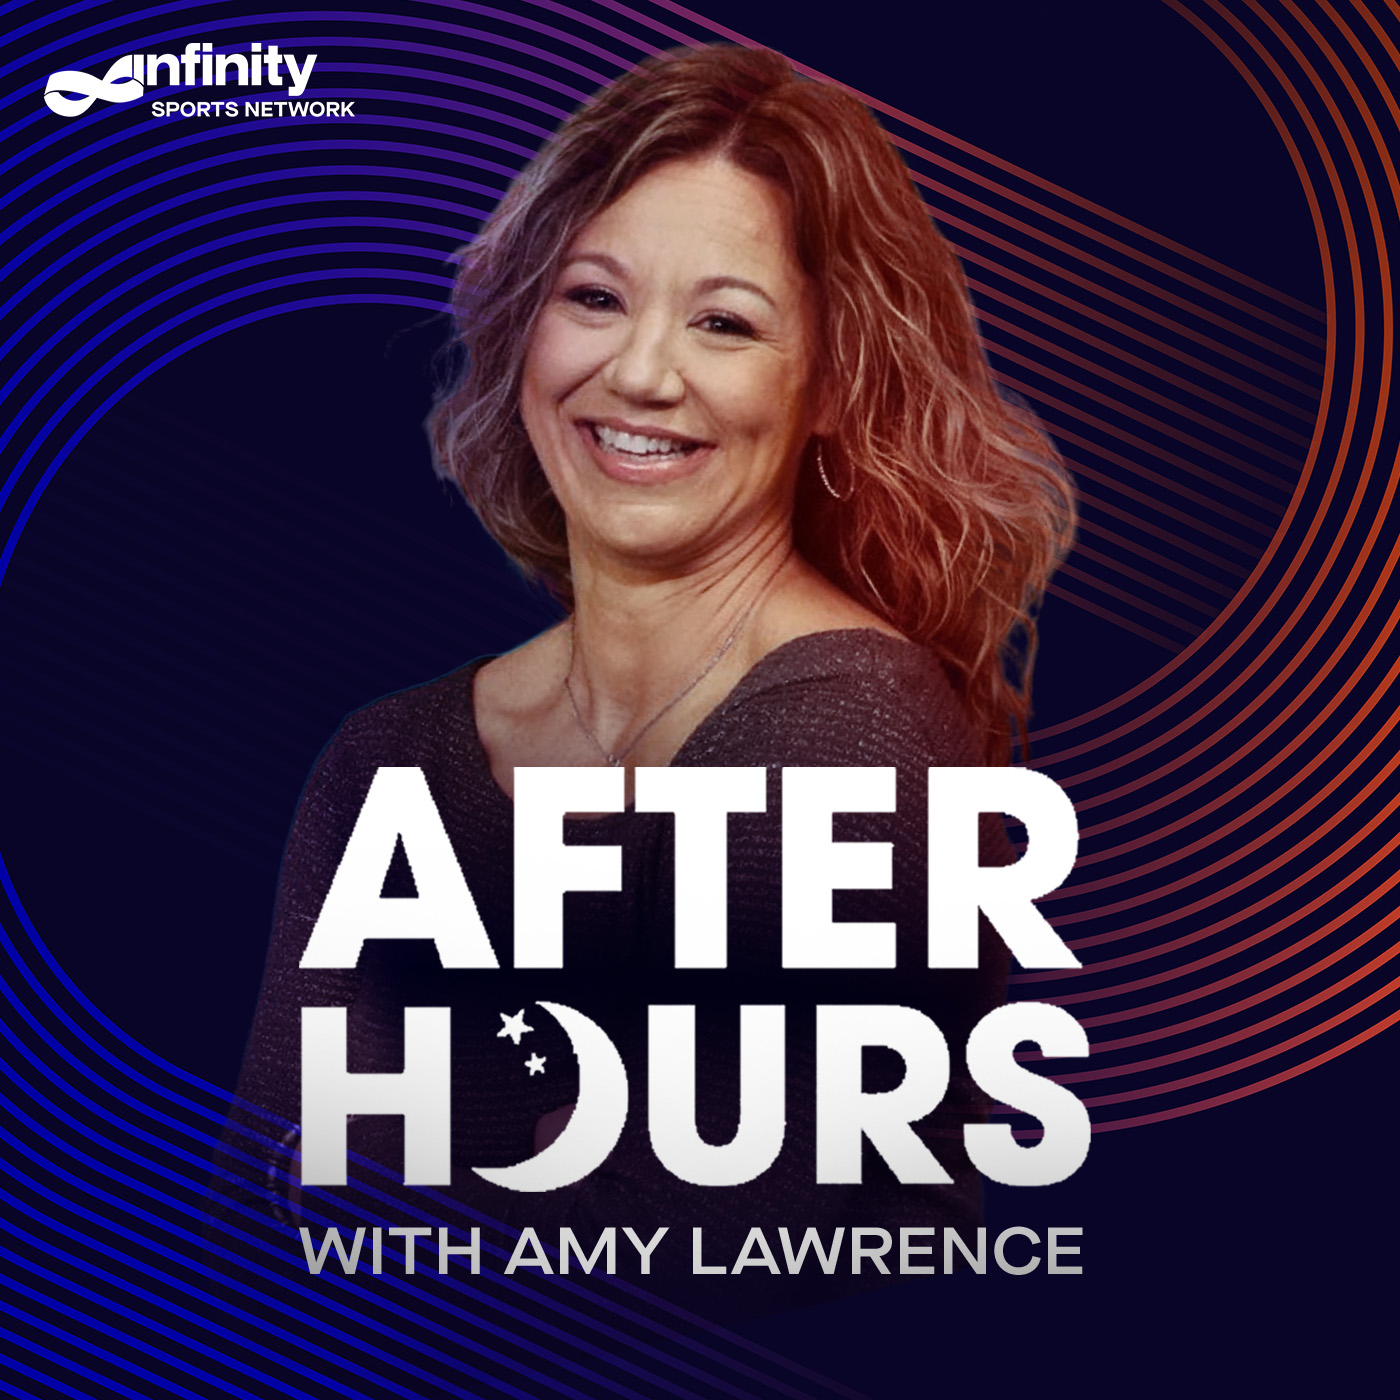 11-9-21 After Hours with Amy Lawrence PODCAST: Hour 1